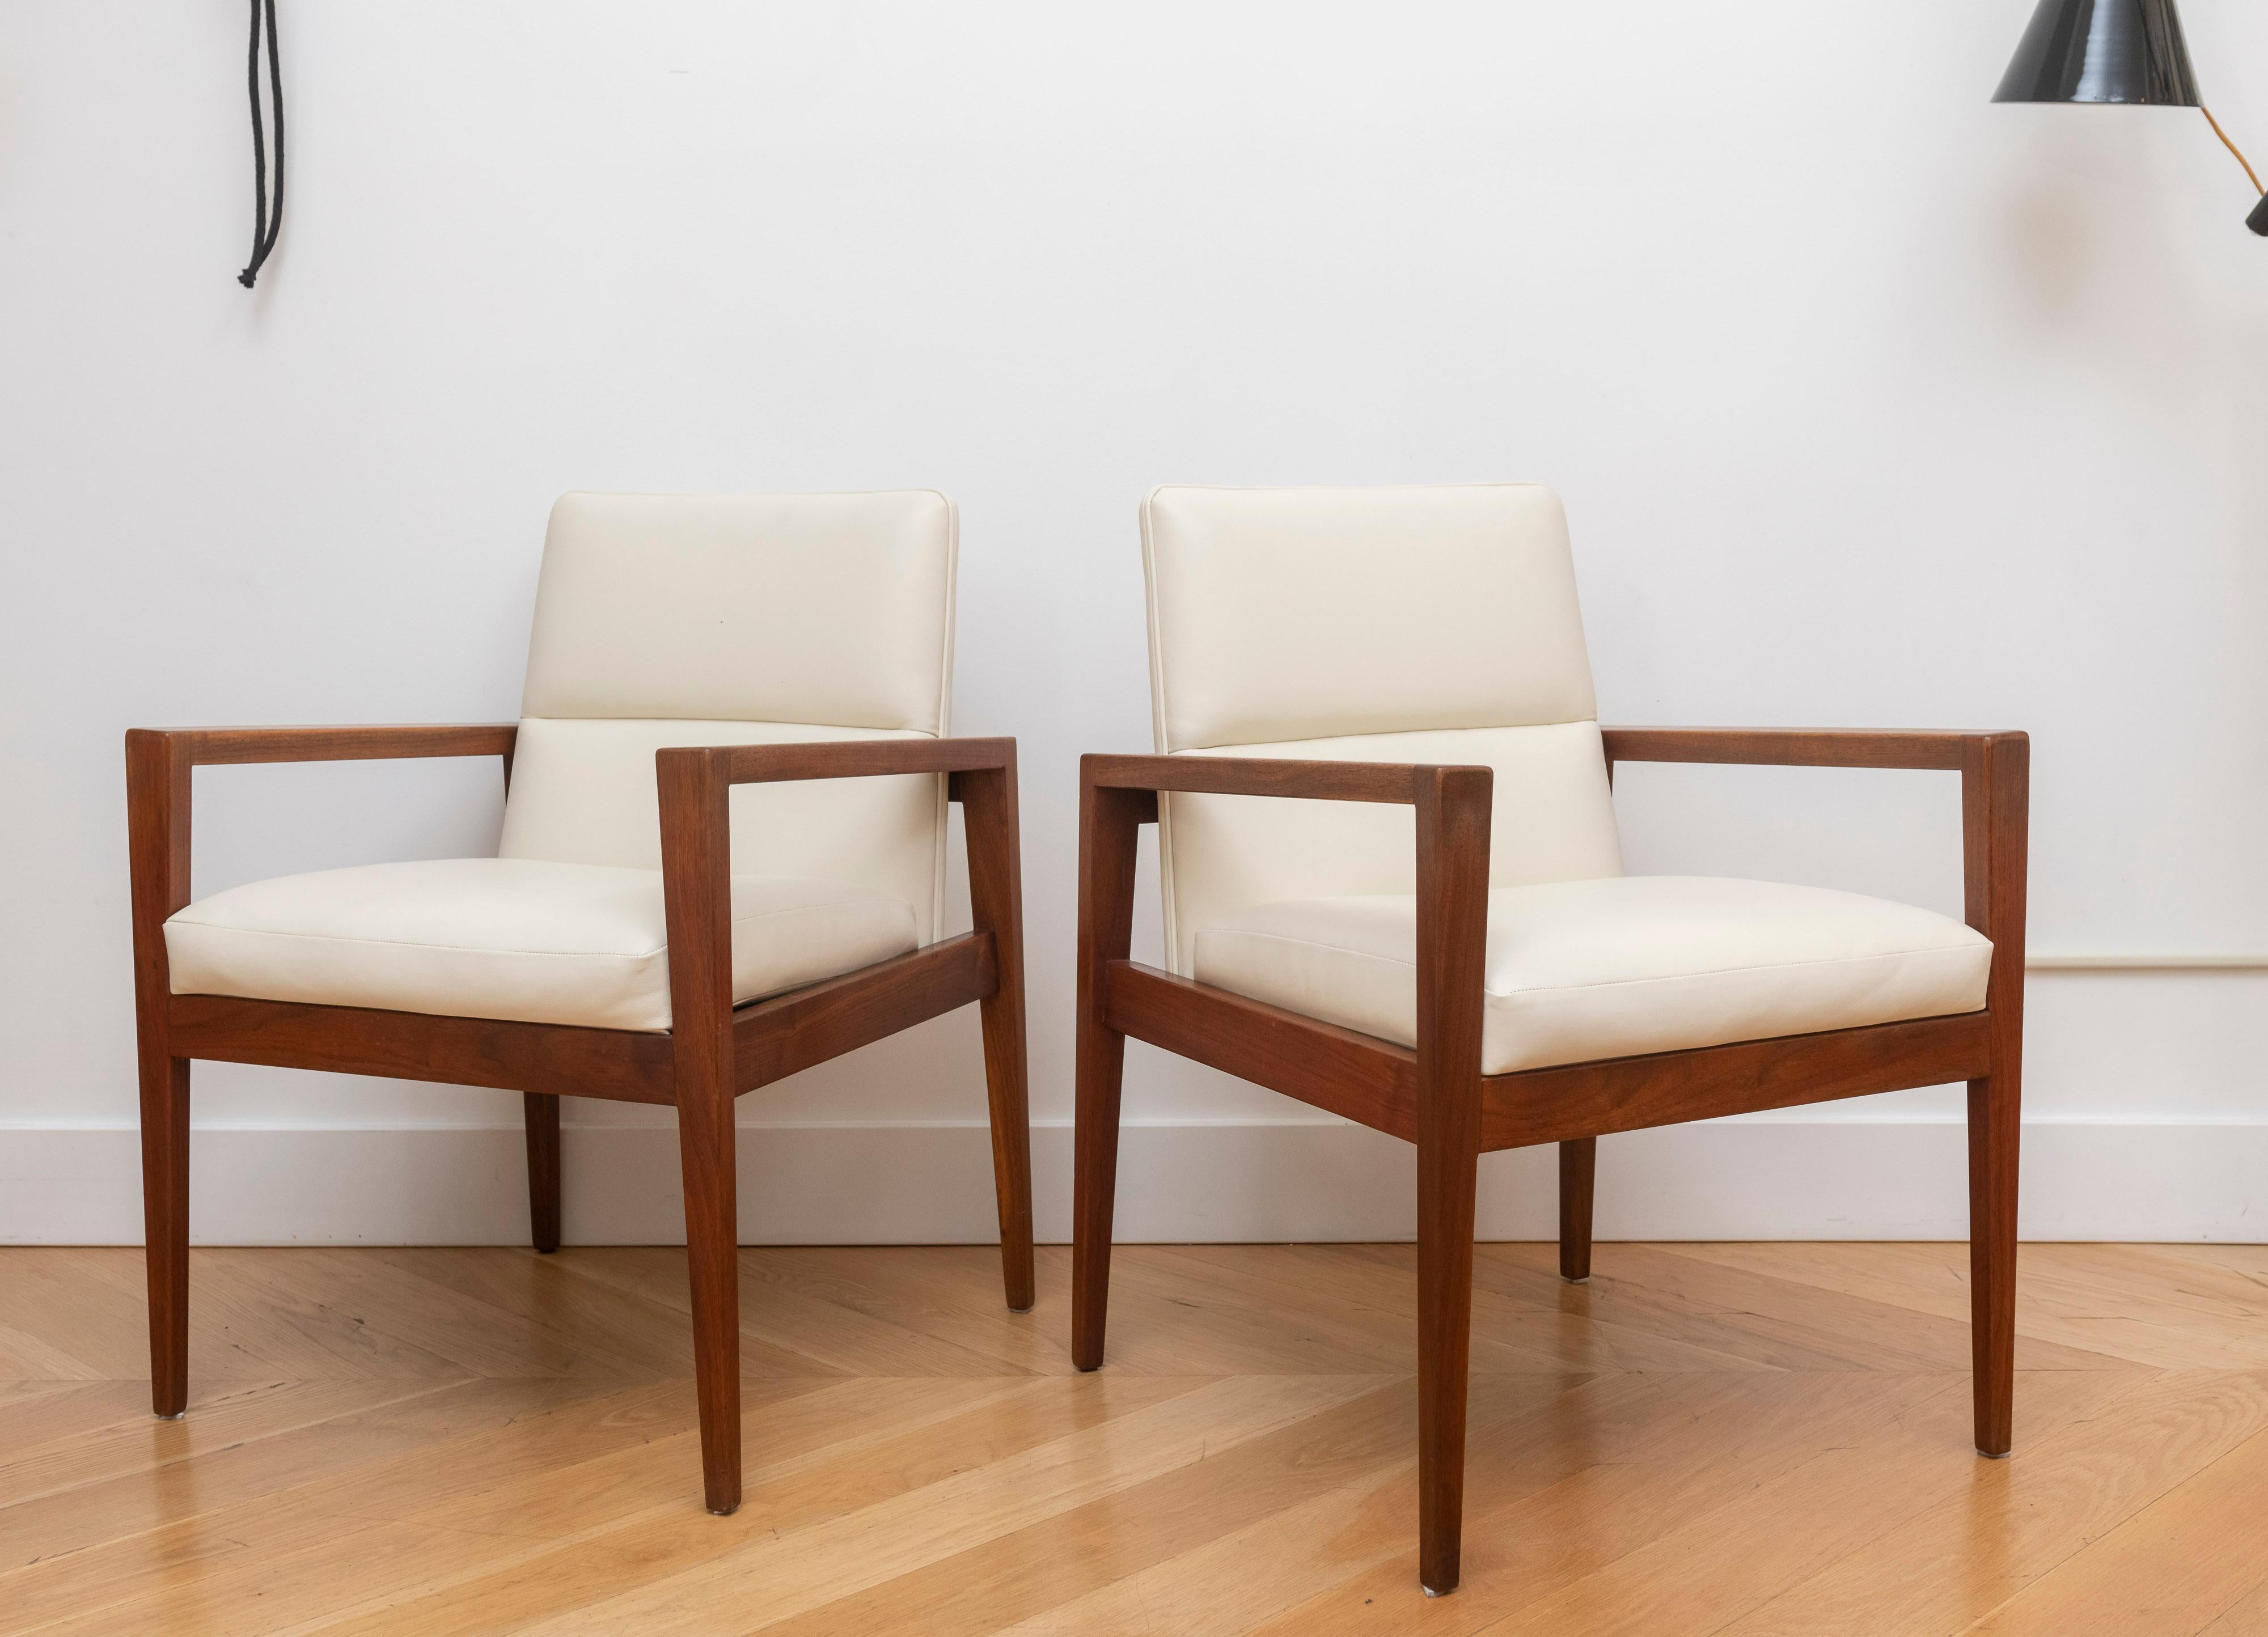 Pair of Jens Risom 1960s arm chairs. These examples have newly finished solid walnut frames with subtly tapered arms and have bean recently upholstered in a soft off-white leather.